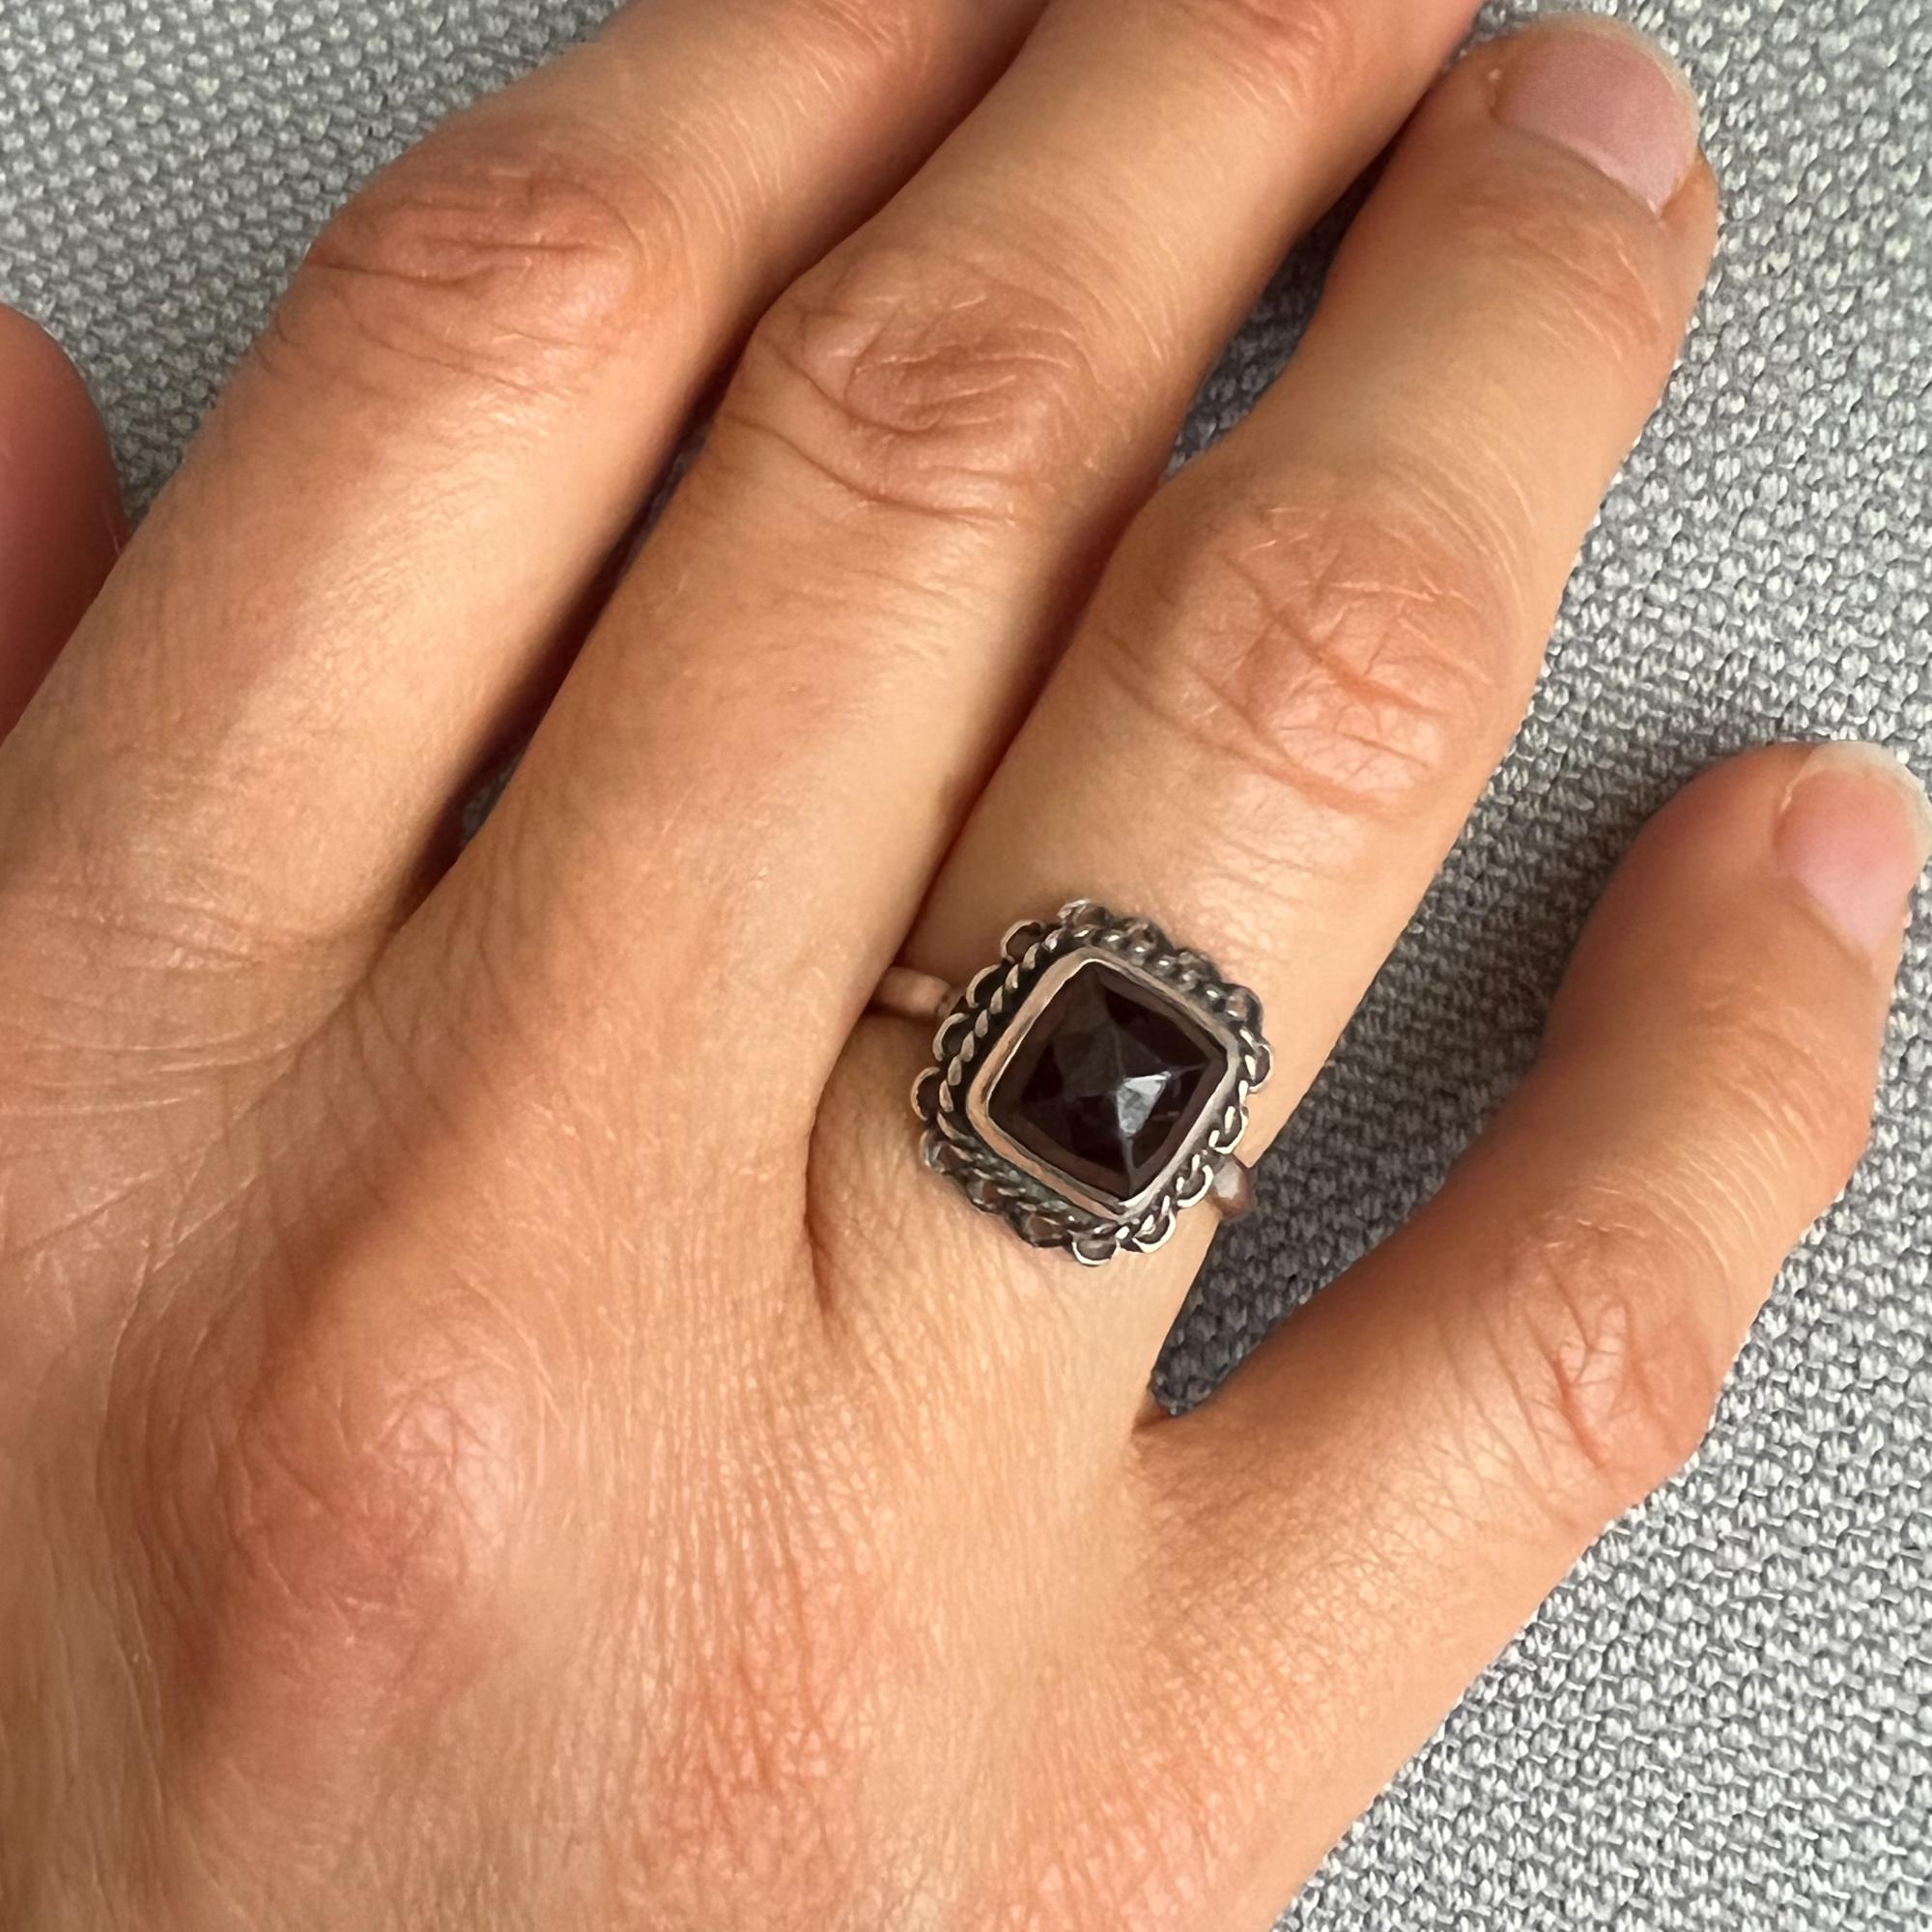 A preloved garnet ring made in silver. This lovely silver square shaped ring is set with a faceted garnet stone. The ring has a great design with one cute square garnet stone set in a silver openwork ornate border with rope motif. A piece to cherish